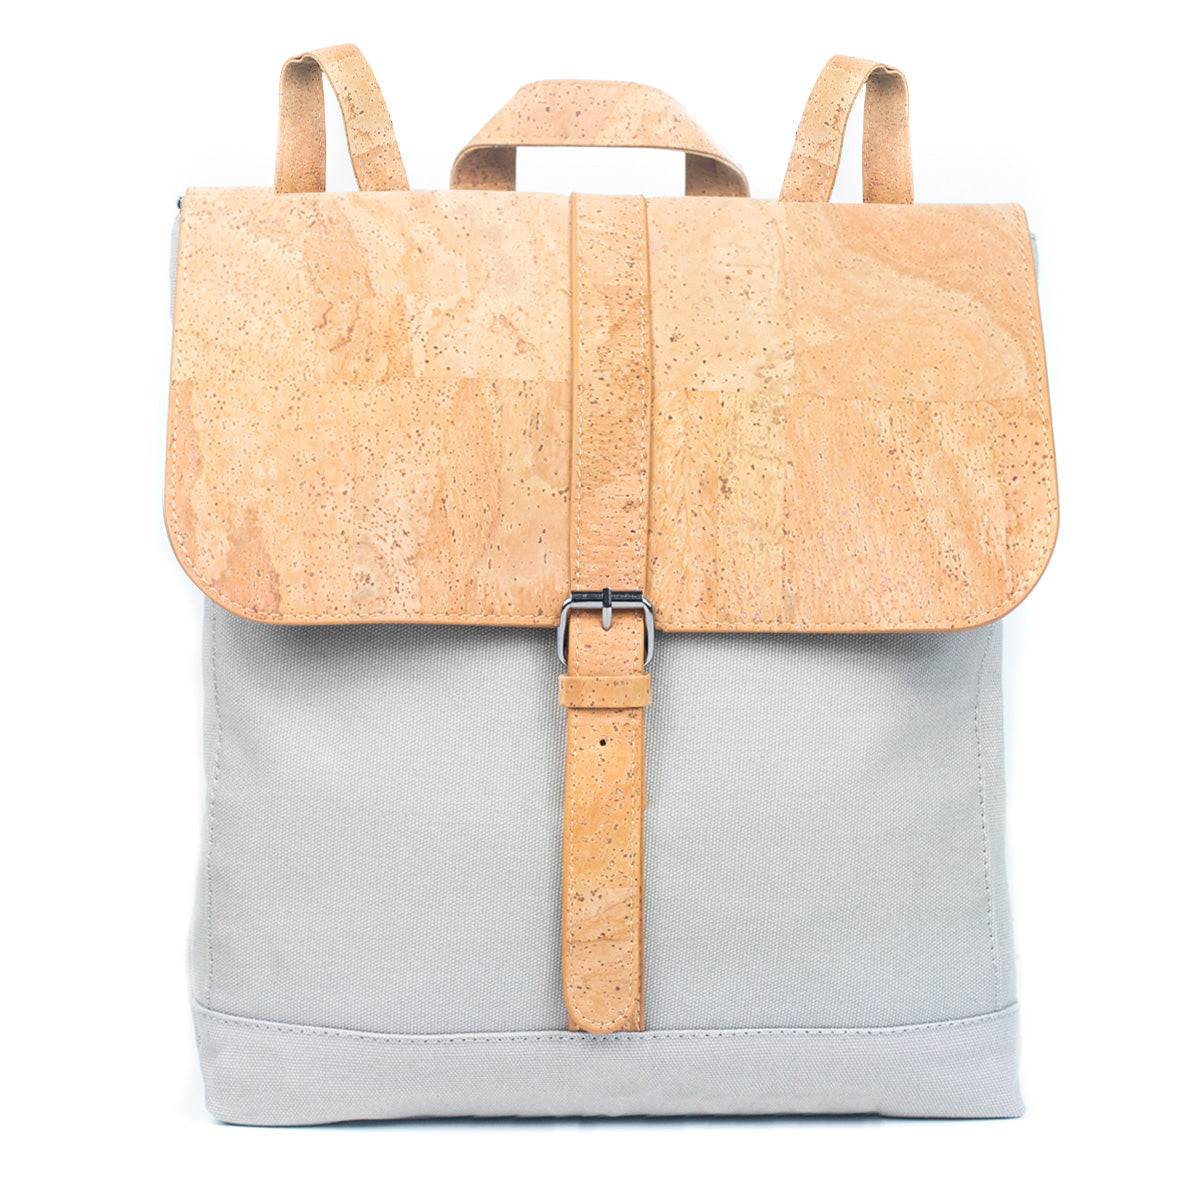 Cork & Canvas Fabric Combination 14-inch Laptop Backpack | THE CORK COLLECTION